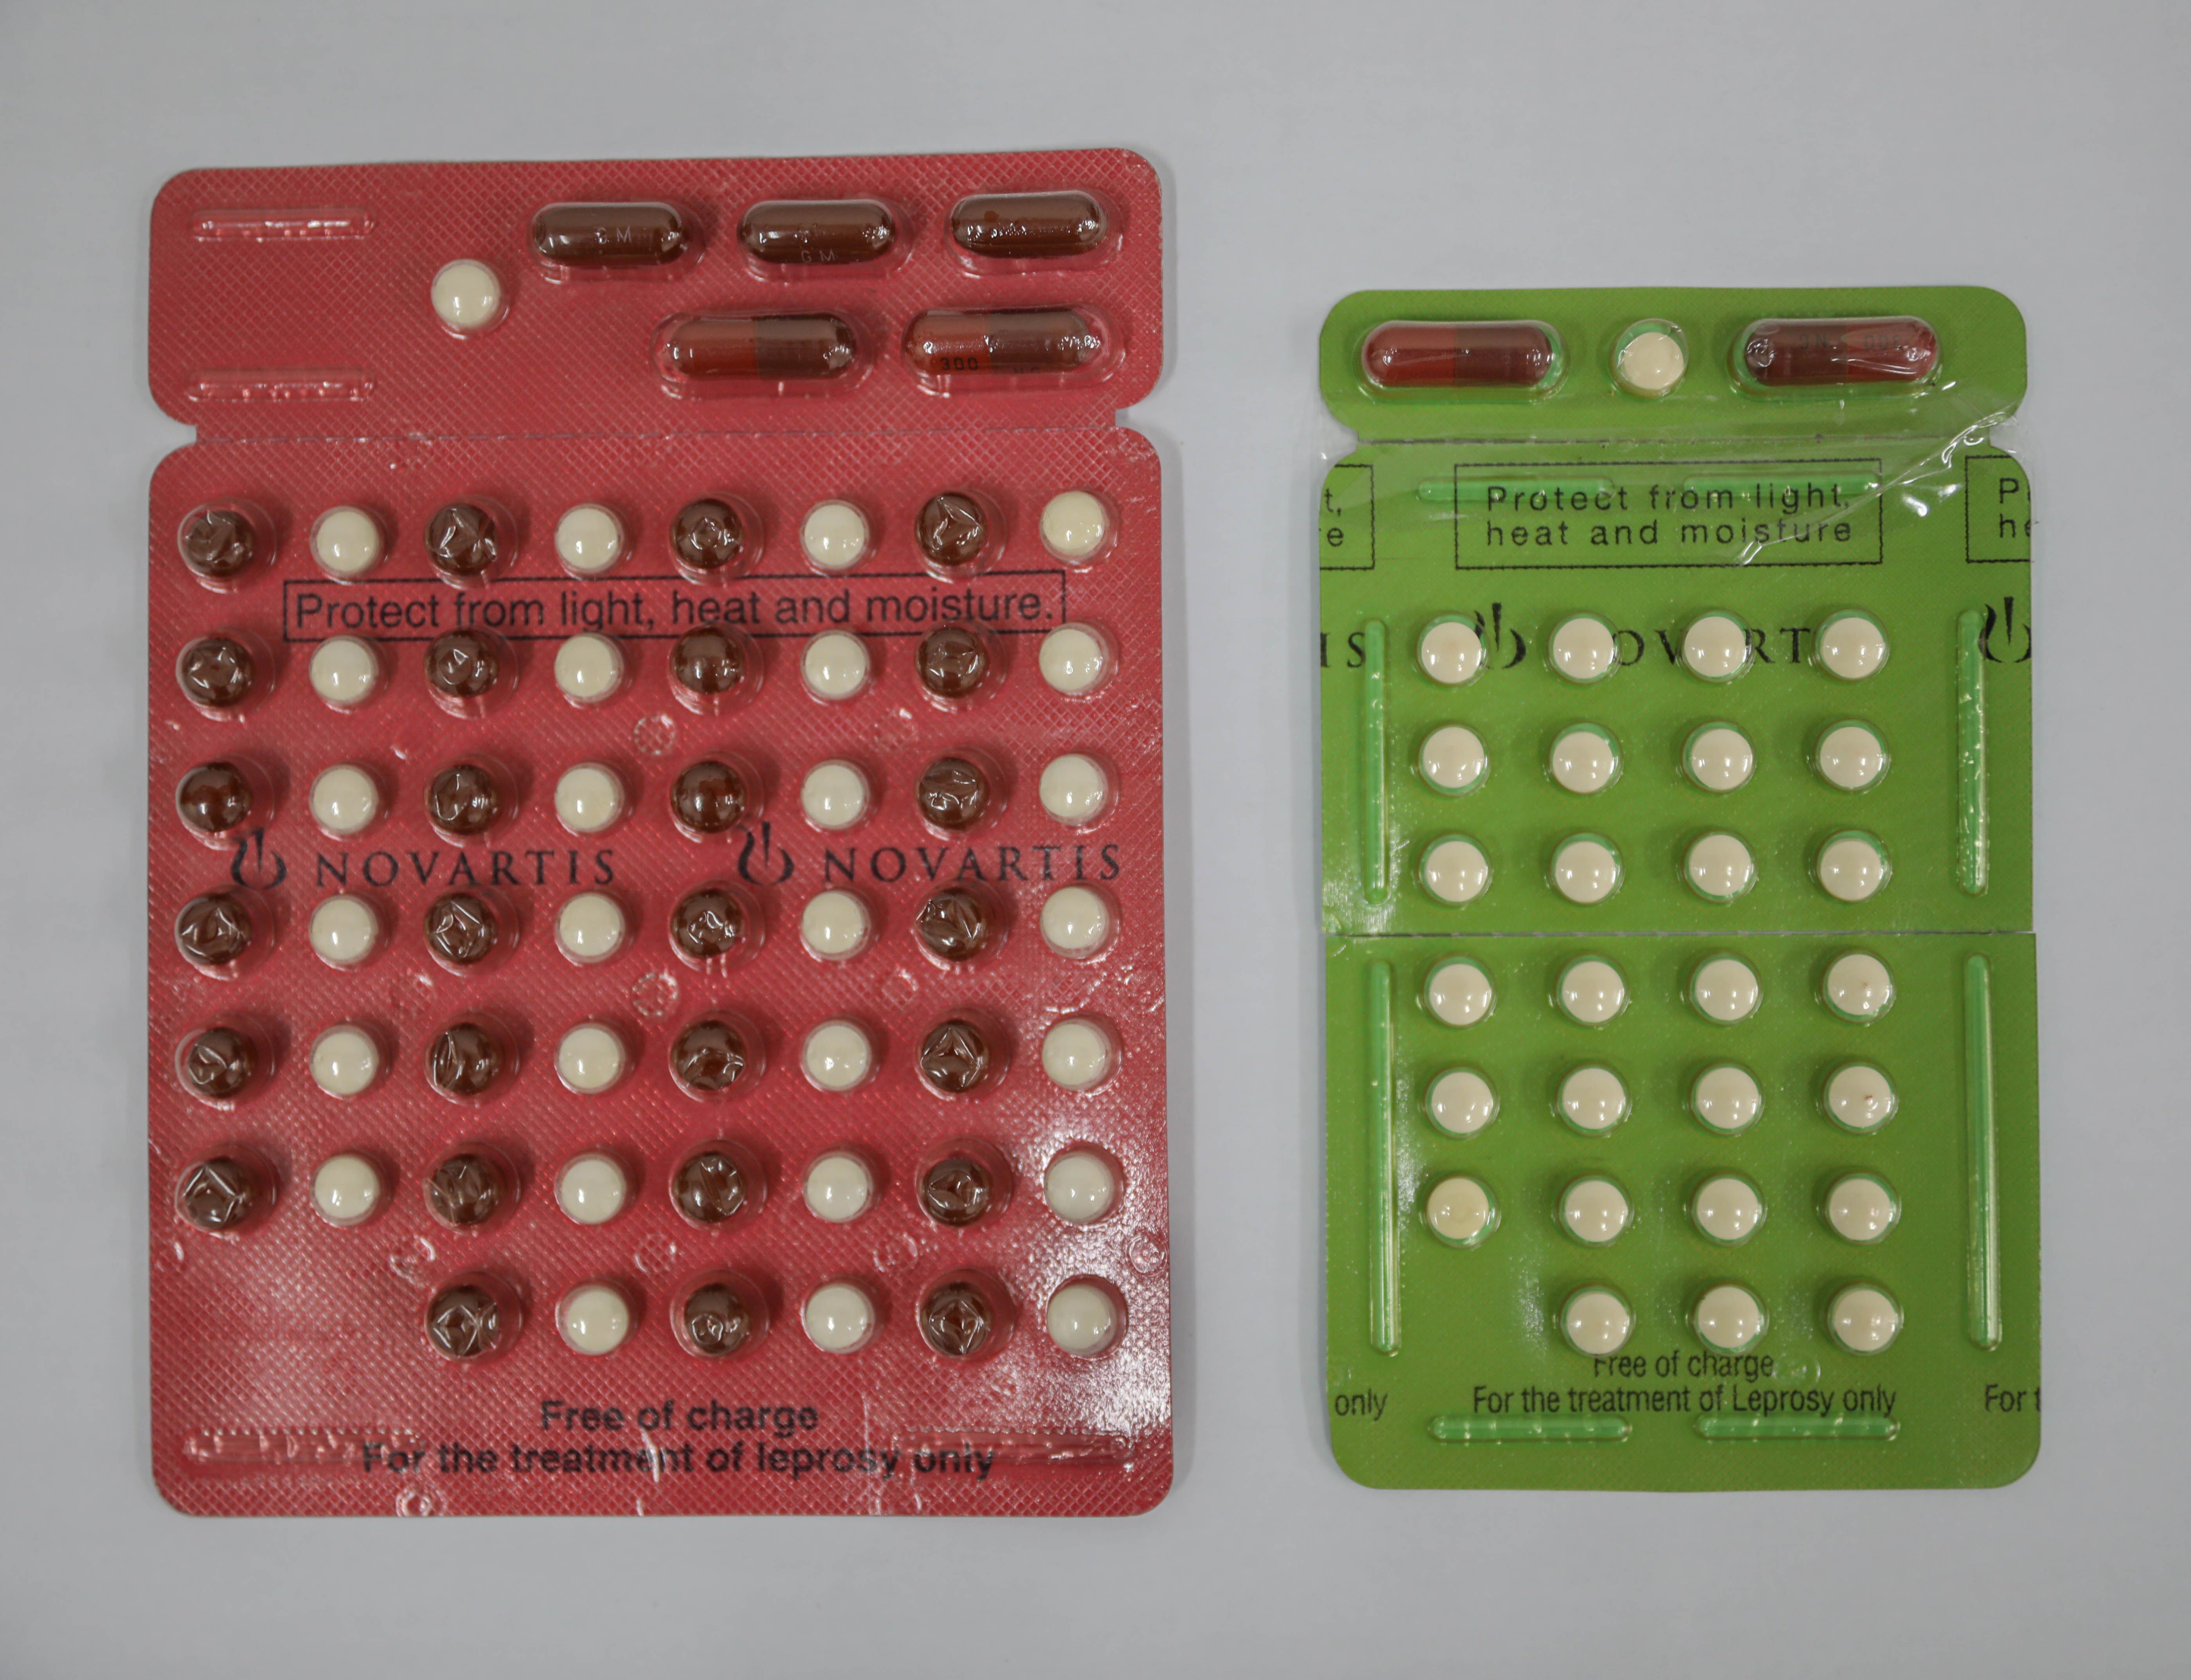 Patients on multi-drug therapy must take pills like these to cure themselves of leprosy. The treatment consists of three main substances—rifampicin, clofazimine, and dapsone. While most treatments last for six to 12 months, some patients with resistance to MDT can be on these types of pills for years. Image by Anton L. Delgado. Brazil, 2020.